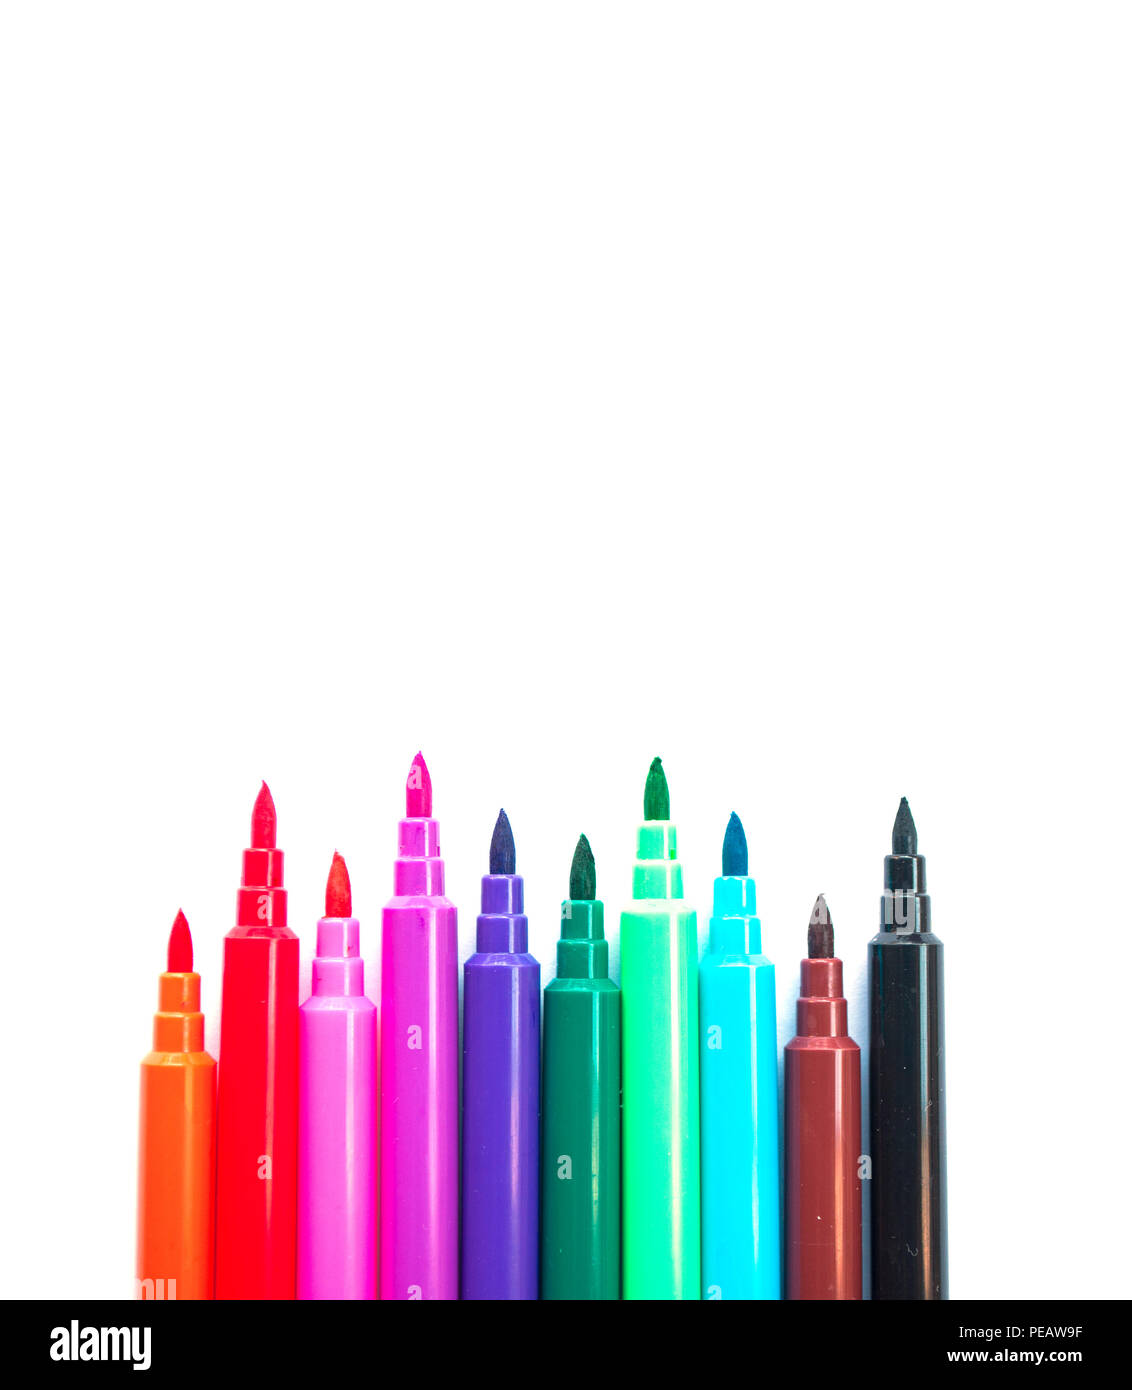 388+ Thousand Color Markers Royalty-Free Images, Stock Photos & Pictures